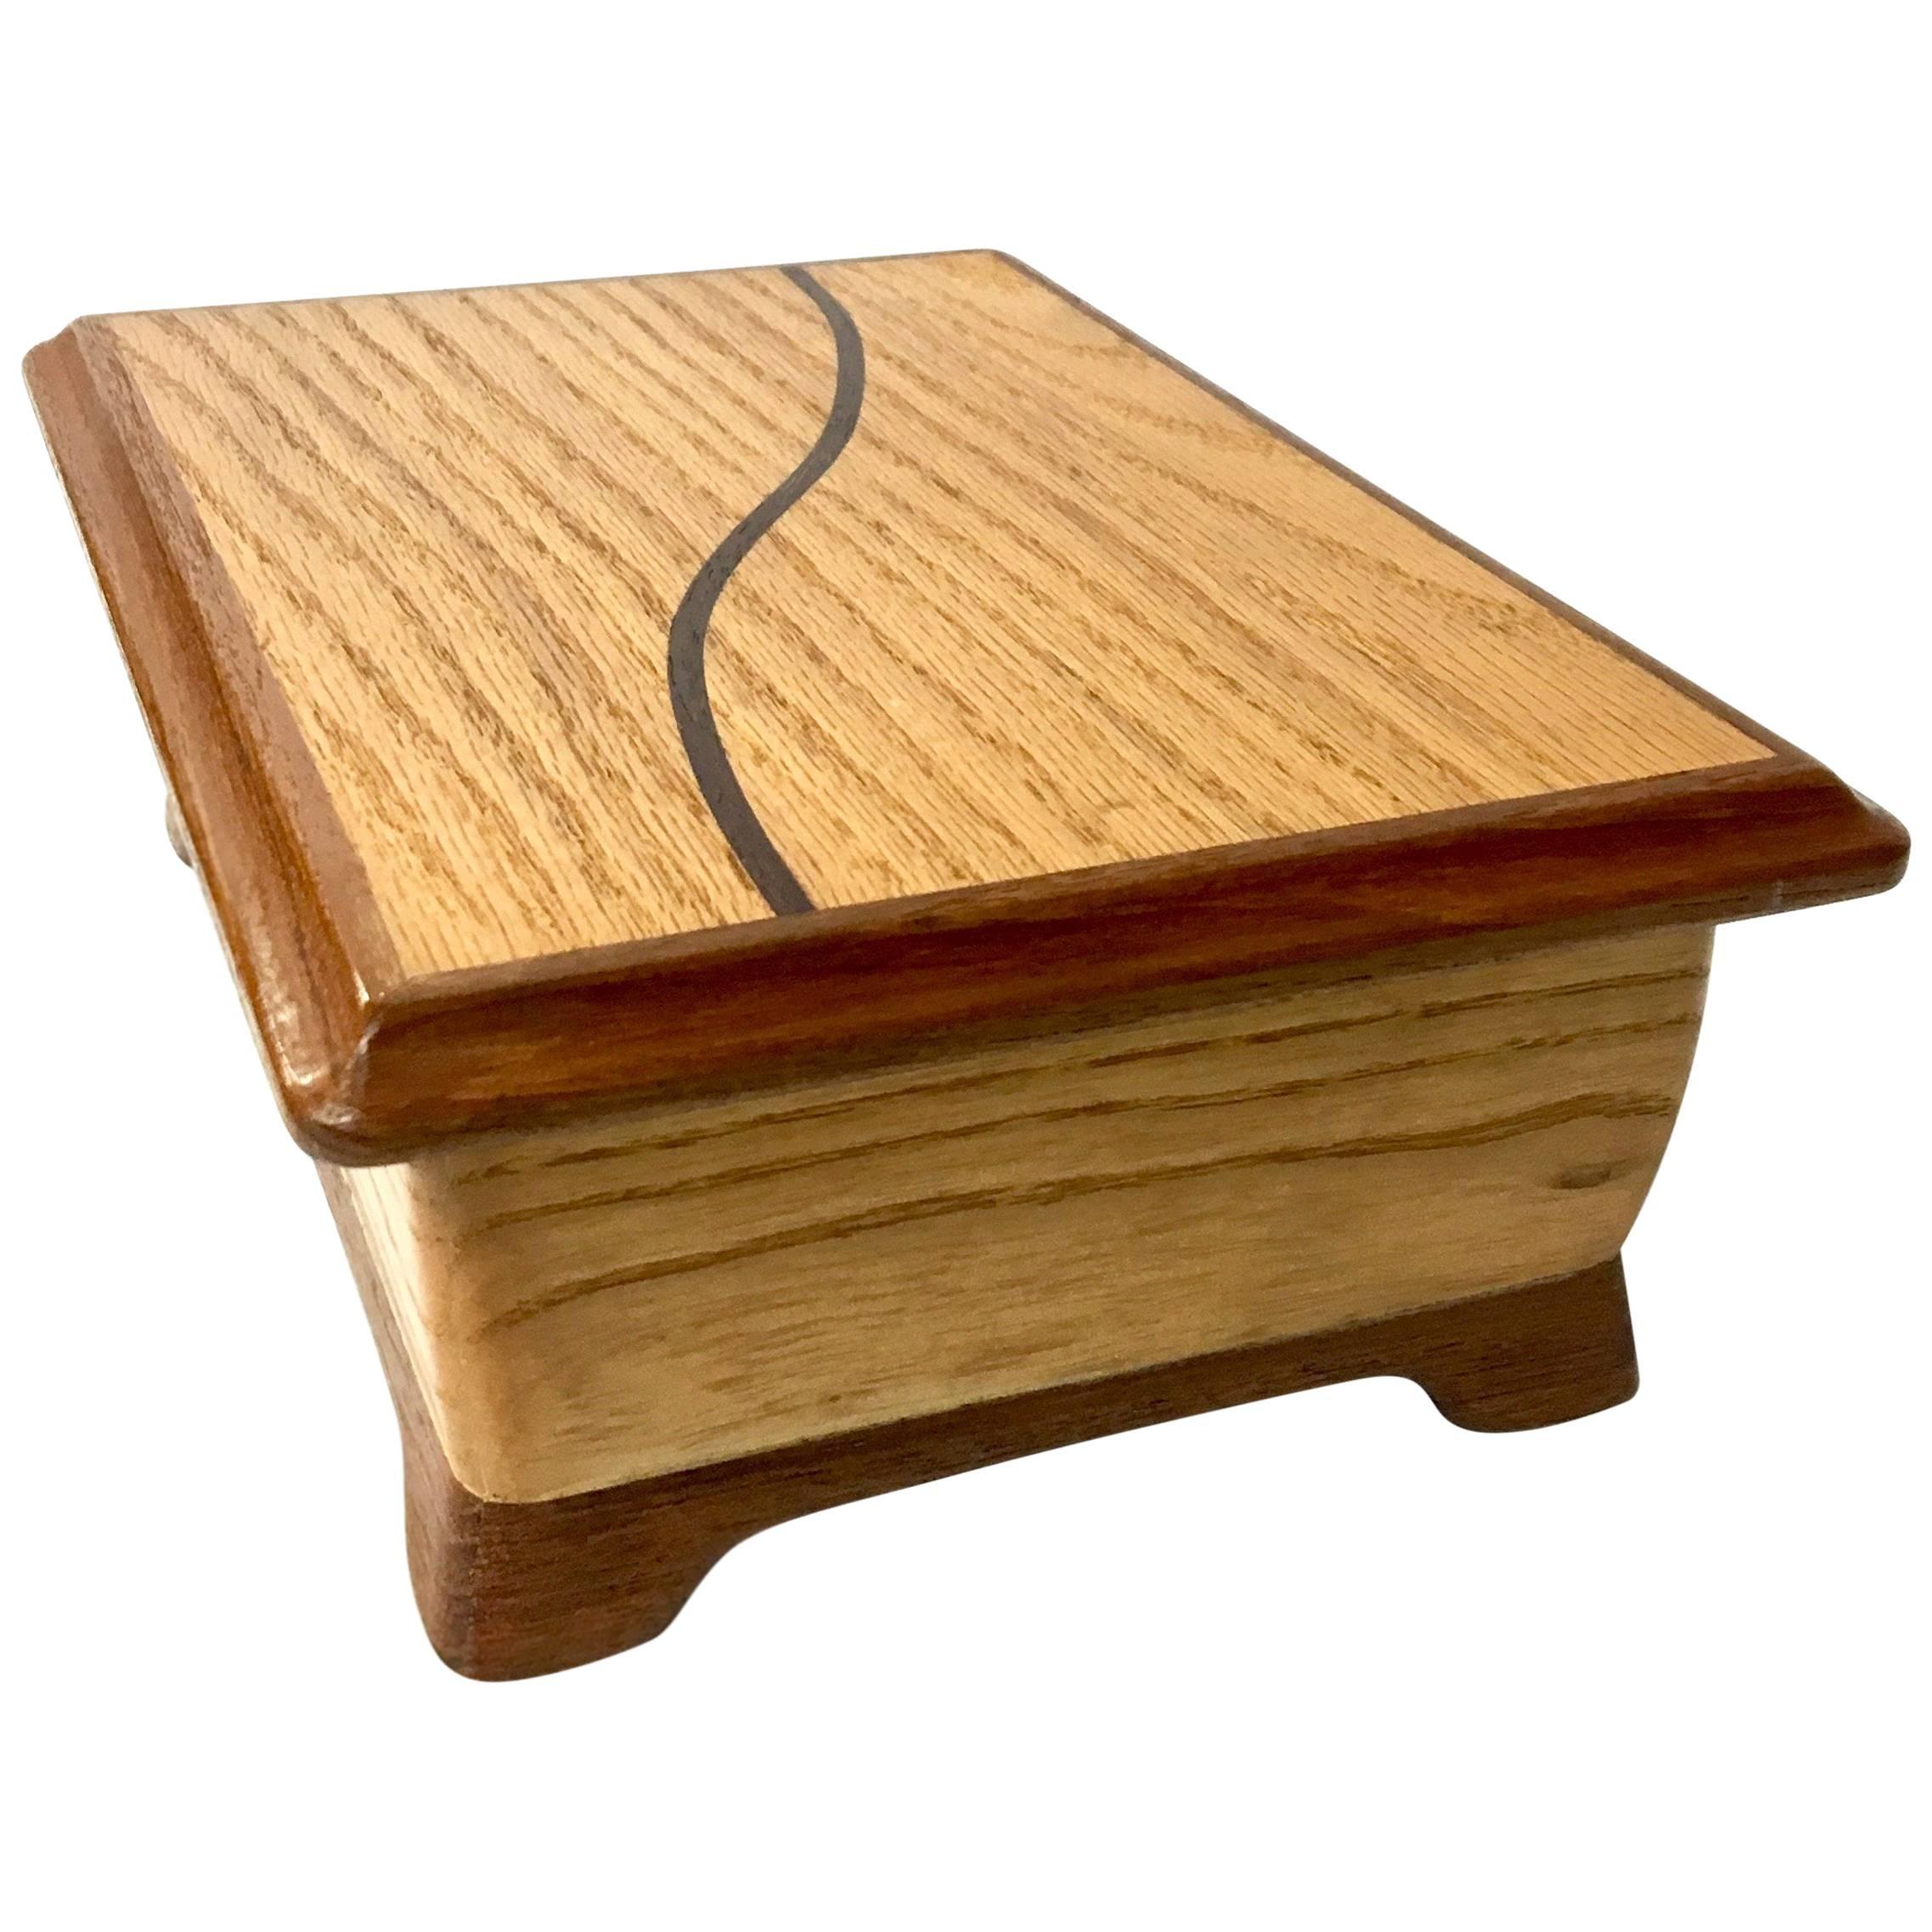 Handcrafted Solid Oak with Rosewood Inlay Jewelry Box